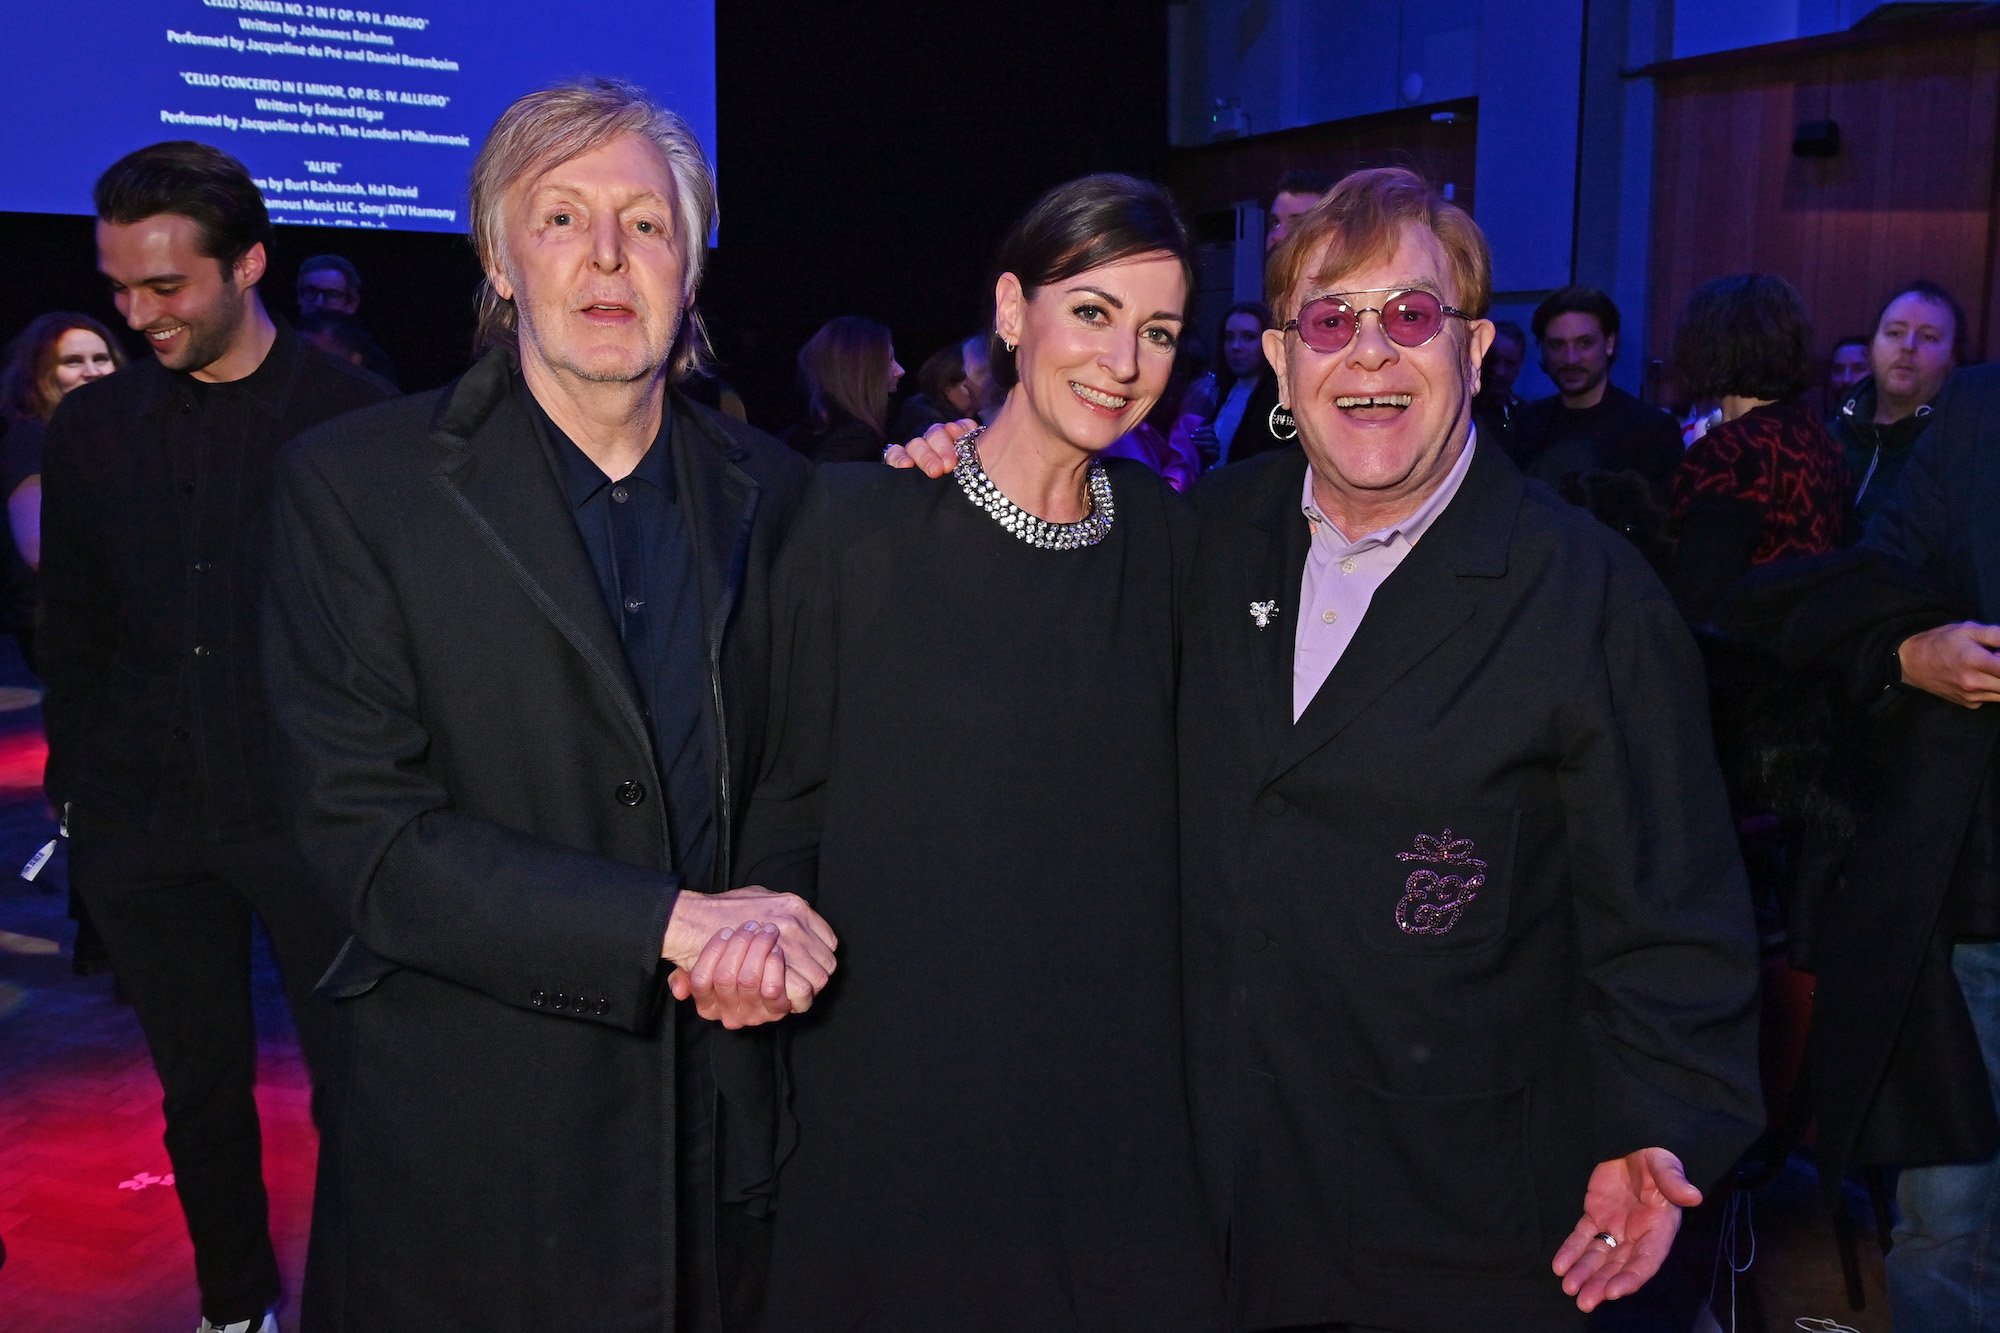 Paul McCartney of The Beatles, Mary McCartney, and Elton John attend the premiere of If These Walls Could Sing in London, England